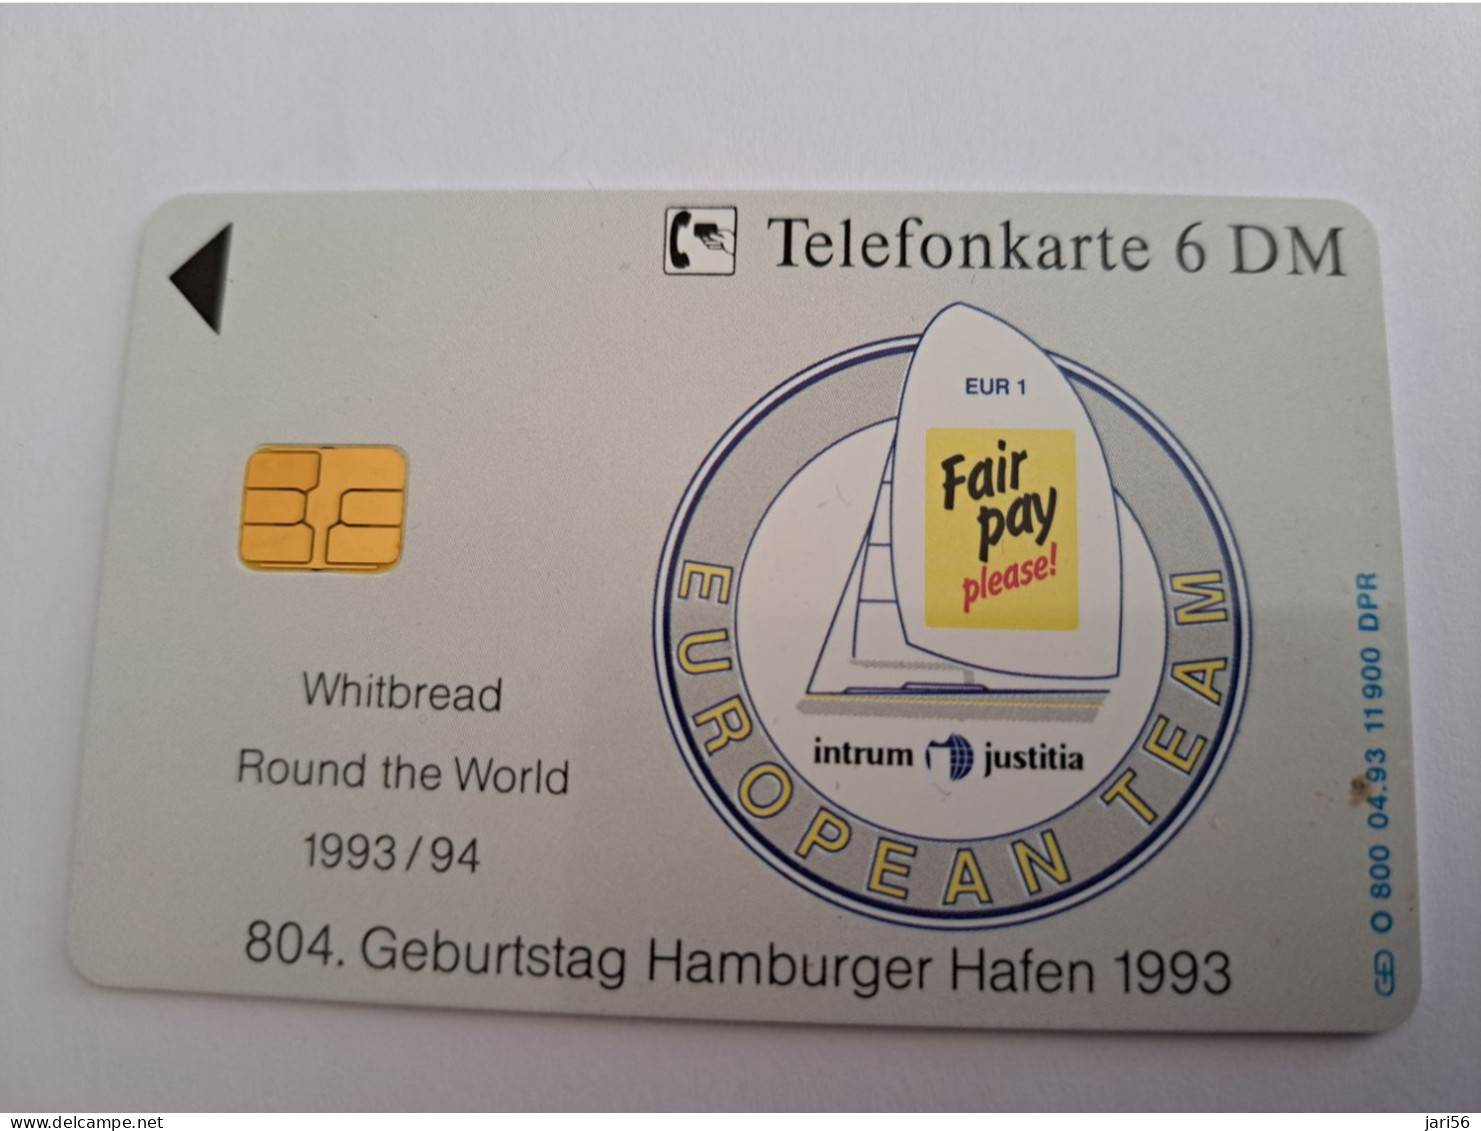 DUITSLAND/ GERMANY  CHIPCARD / JUSTITIA INTRUM/ WHEIBREAD RACE/ BOAT  /  O-800  111900 EX  / MINT CARD     **16655** - K-Series : Série Clients